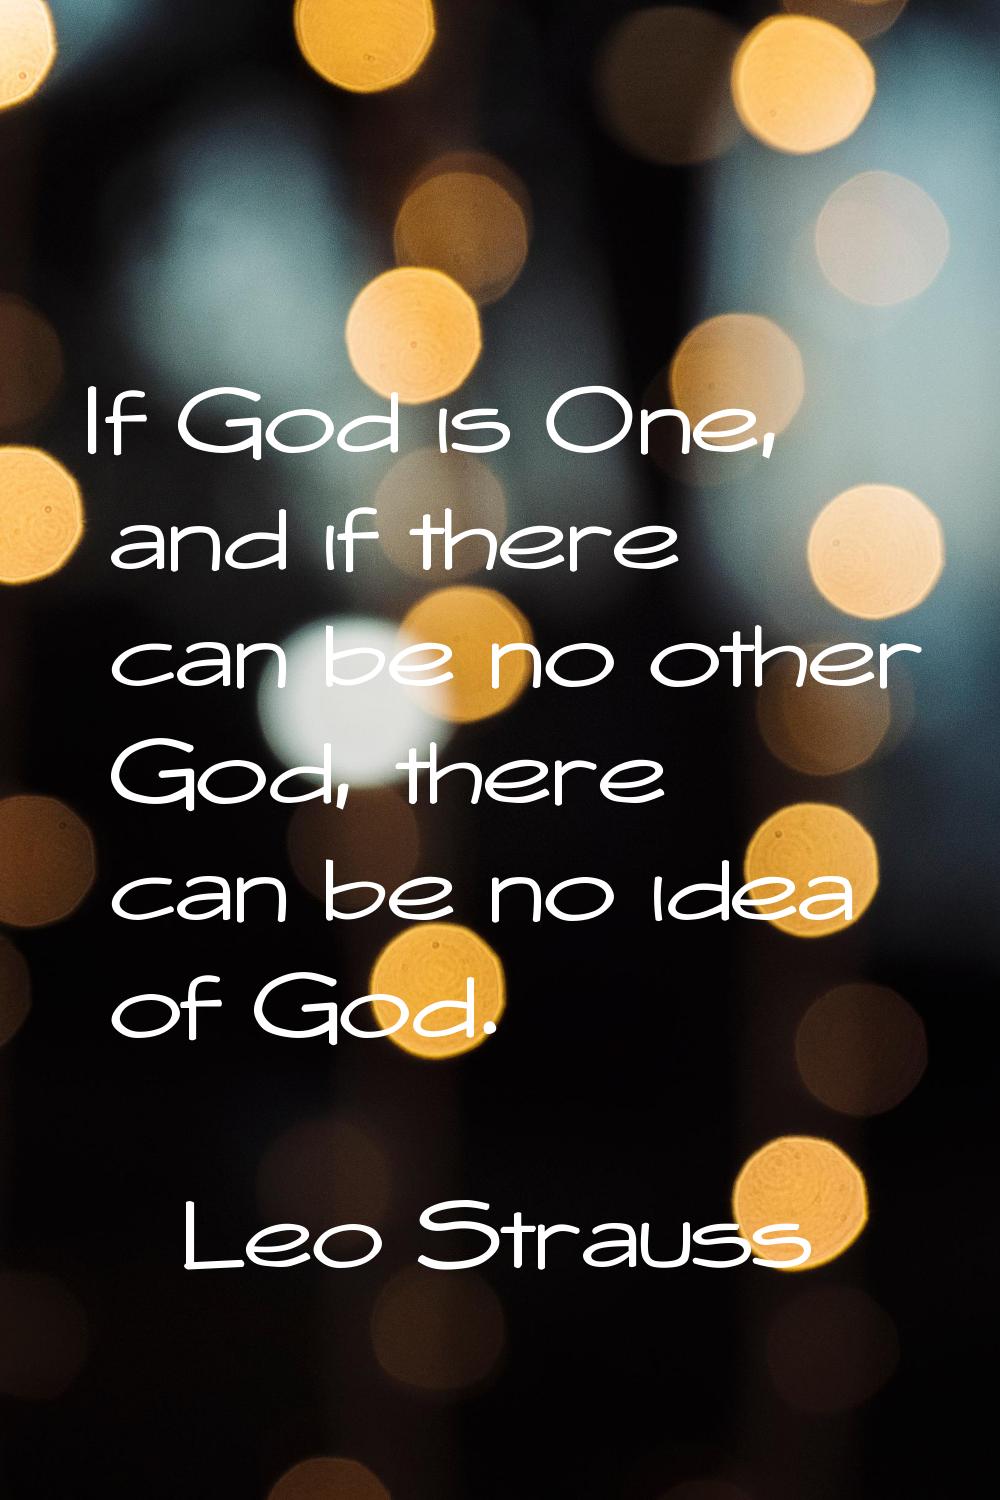 If God is One, and if there can be no other God, there can be no idea of God.